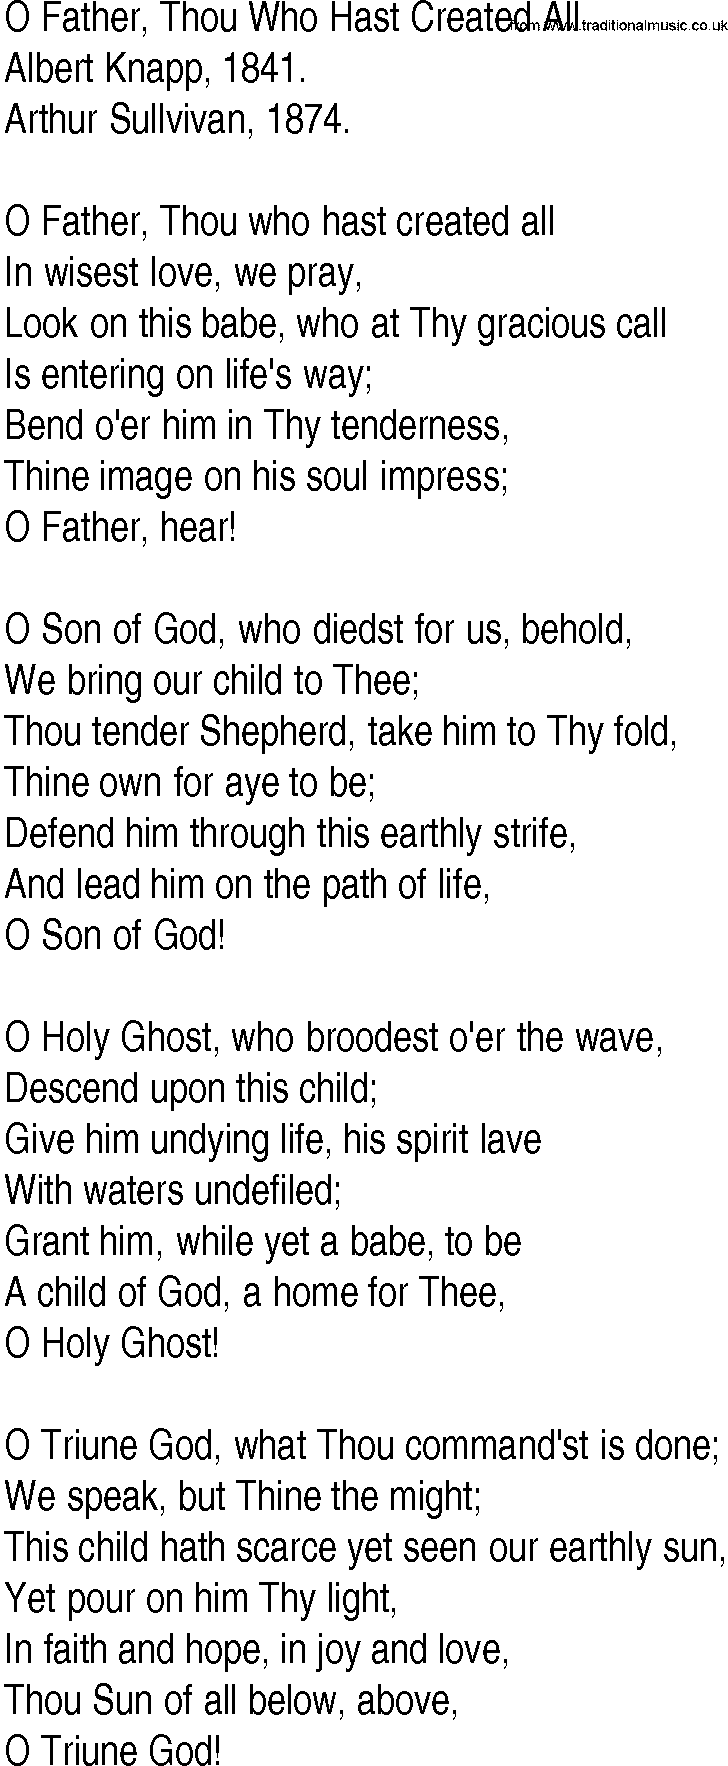 Hymn and Gospel Song: O Father, Thou Who Hast Created All by Albert Knapp lyrics